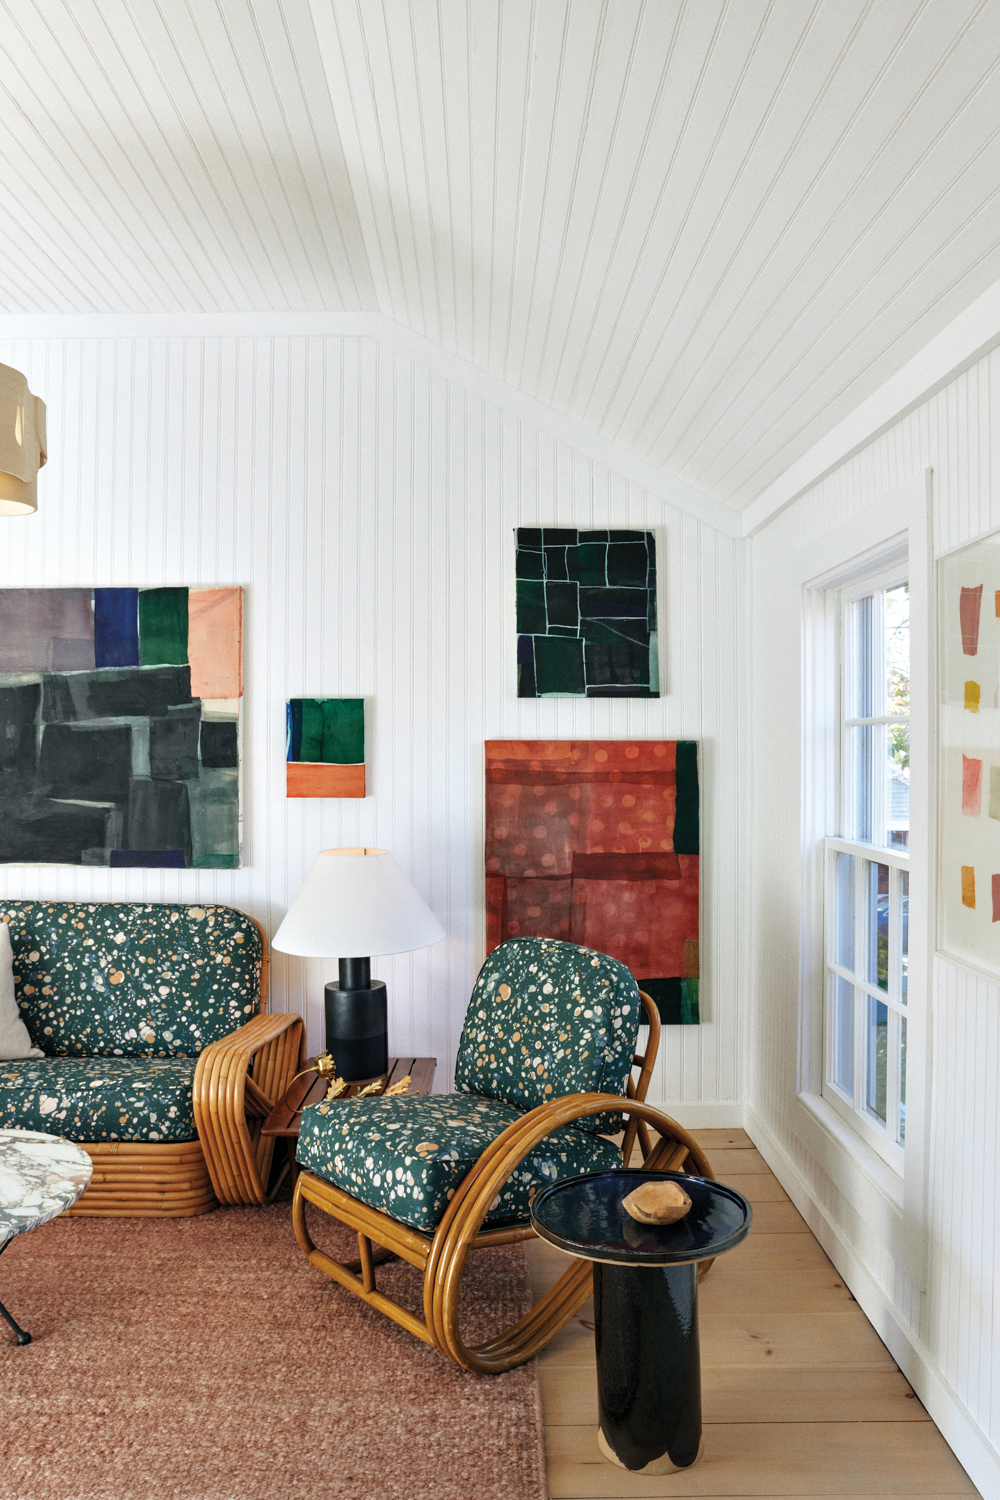 Hamptons art locale Onna House's bright room with green speckled armchairs, square artwork and windows